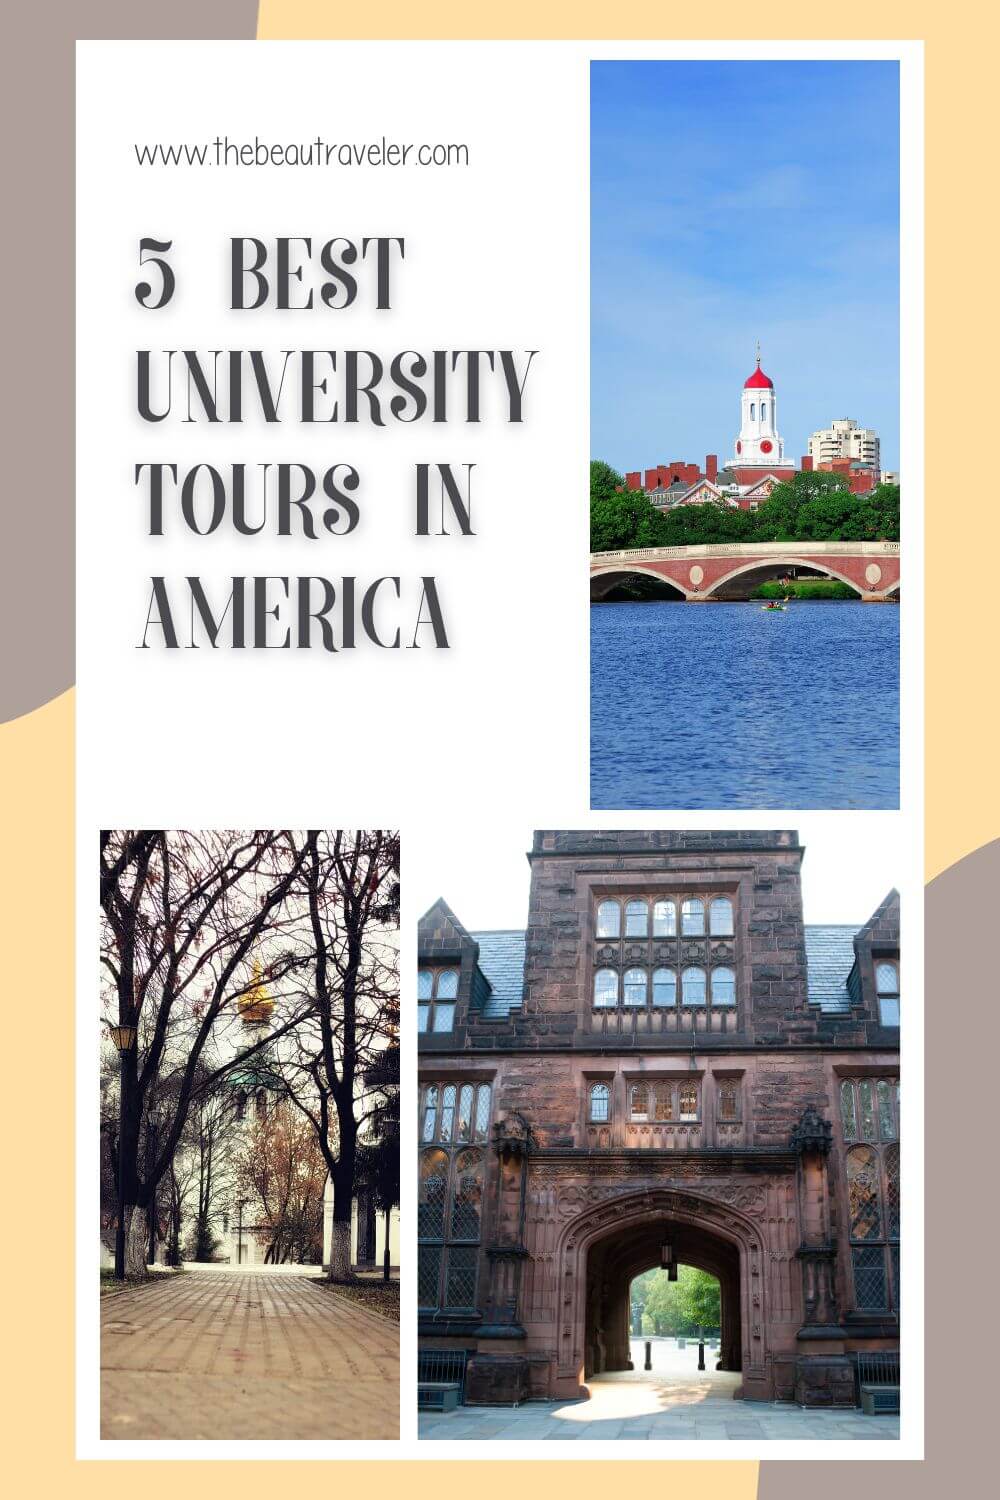 Academic Mravels: Top 5 Universities in America Open for Tourists to Explore - The BeauTraveler